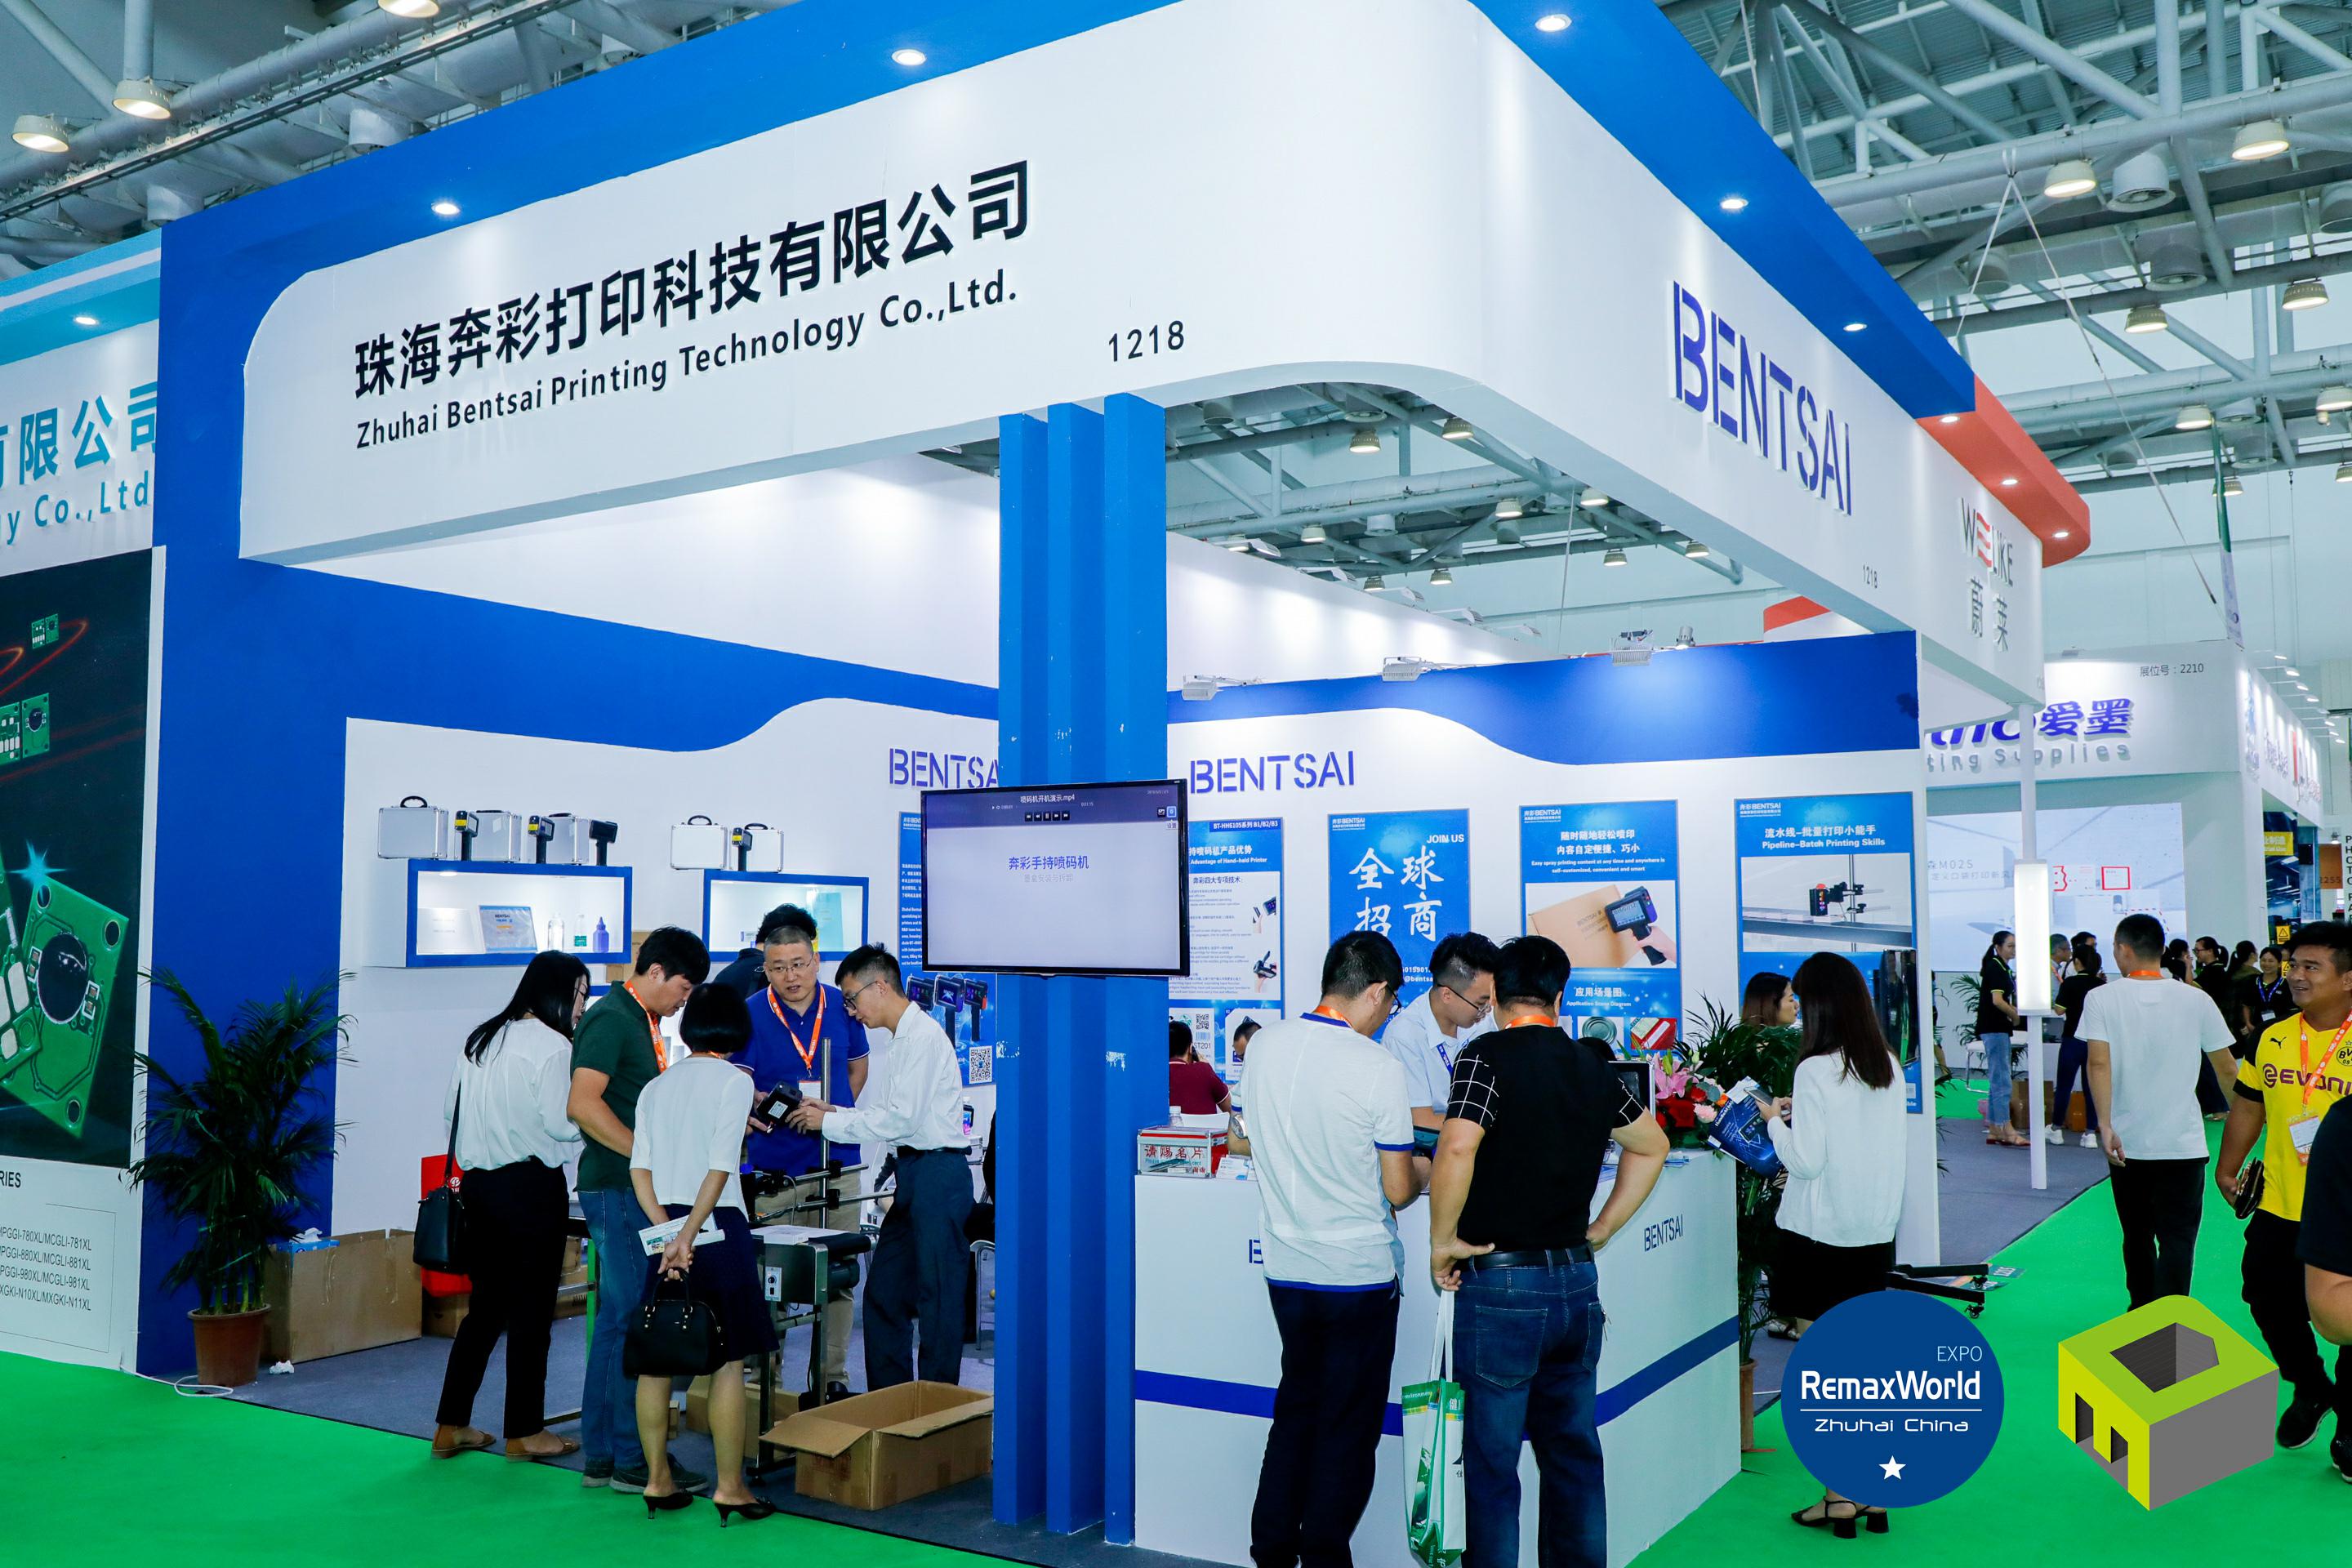 What’s New about Chinese Printers at RemaxWorld rtmworld